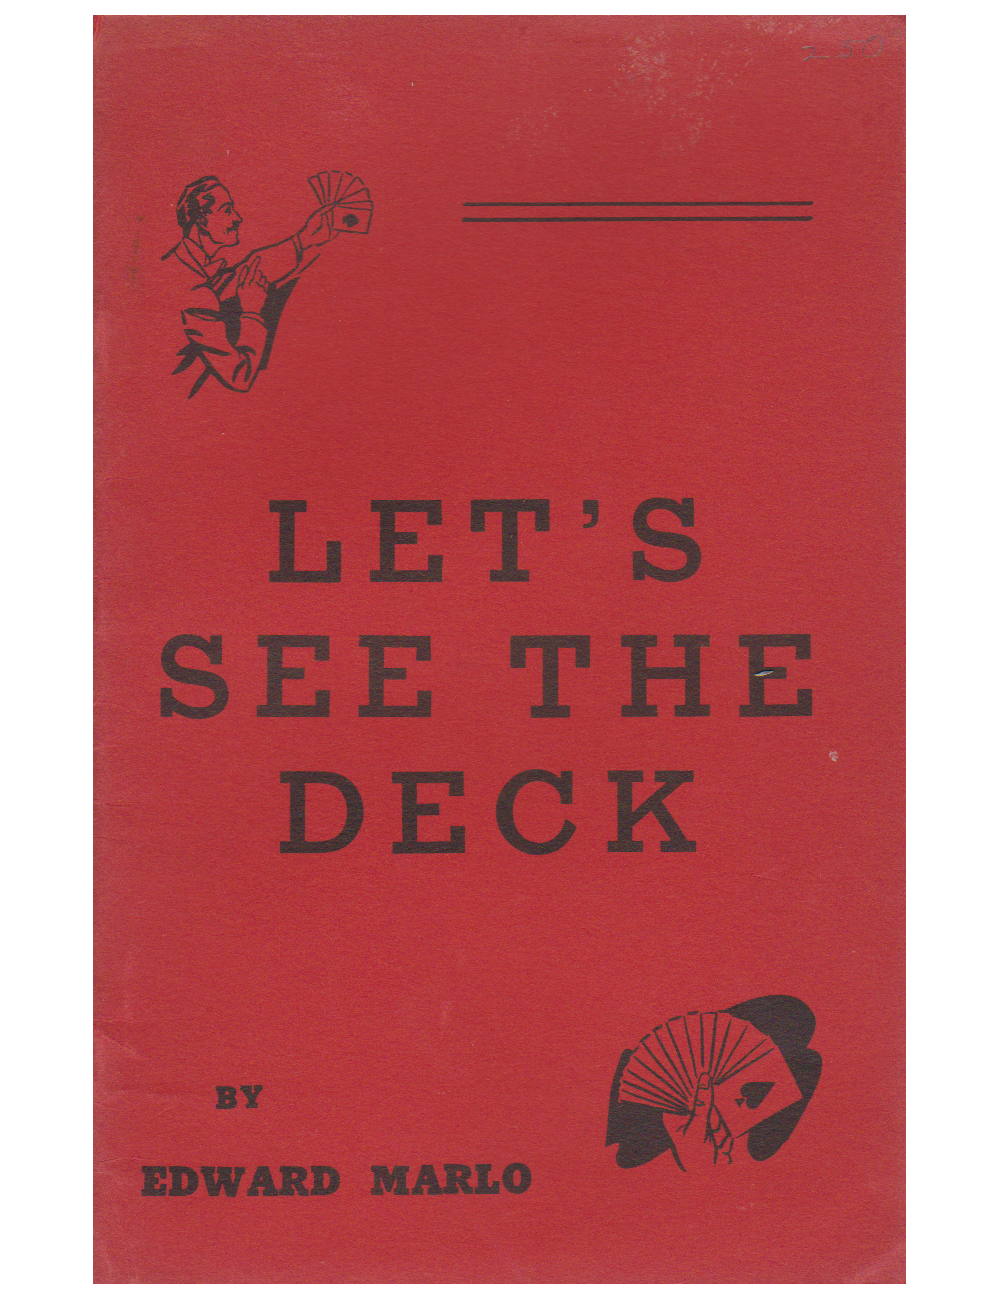 LET'S SEE THE DECK BY EDWARD MARLO